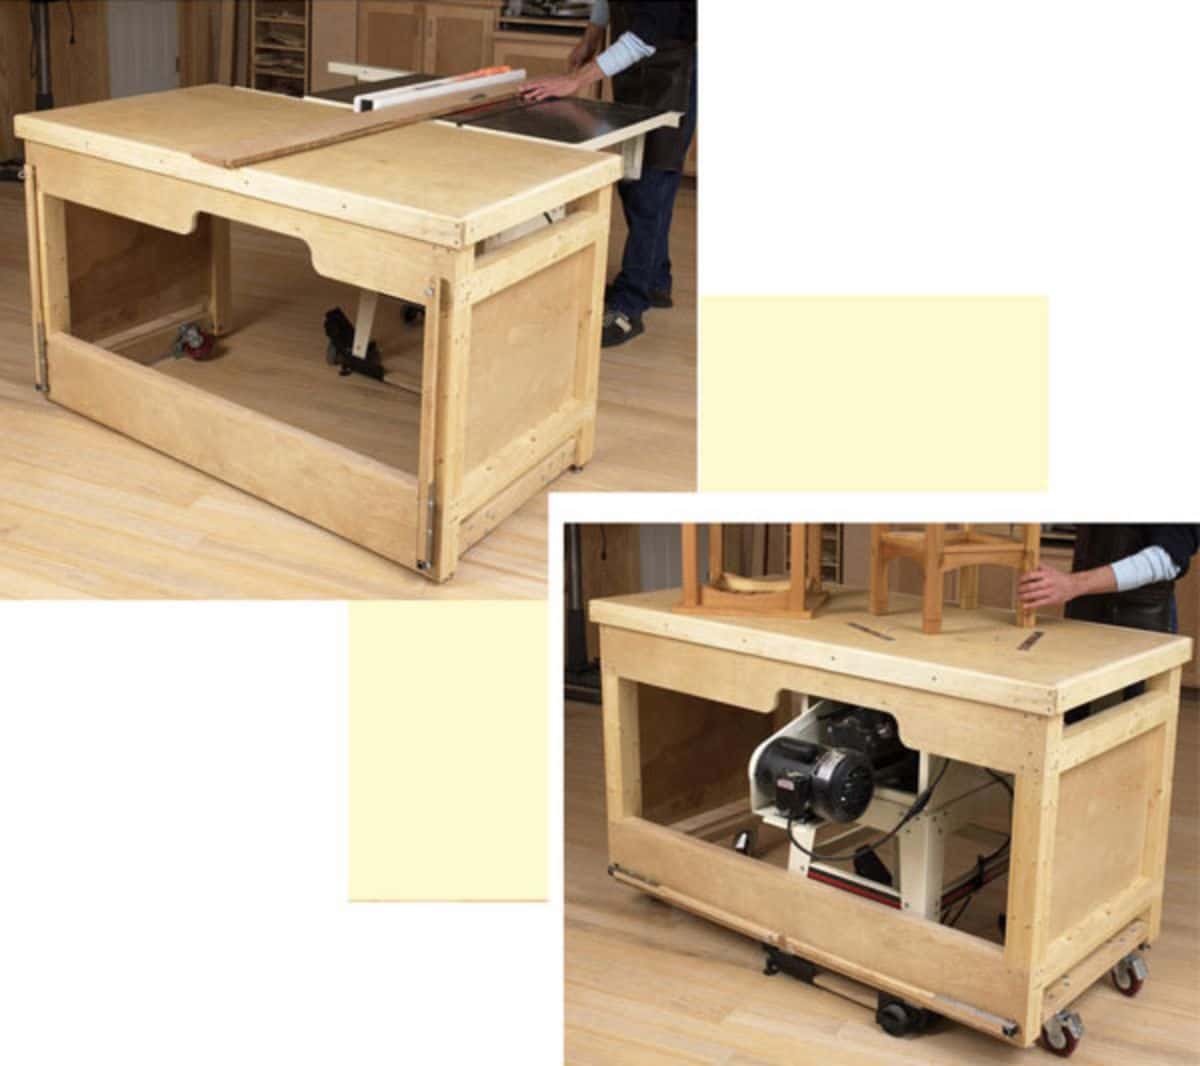 Space-Saving Double-Duty Tablesaw Workbench